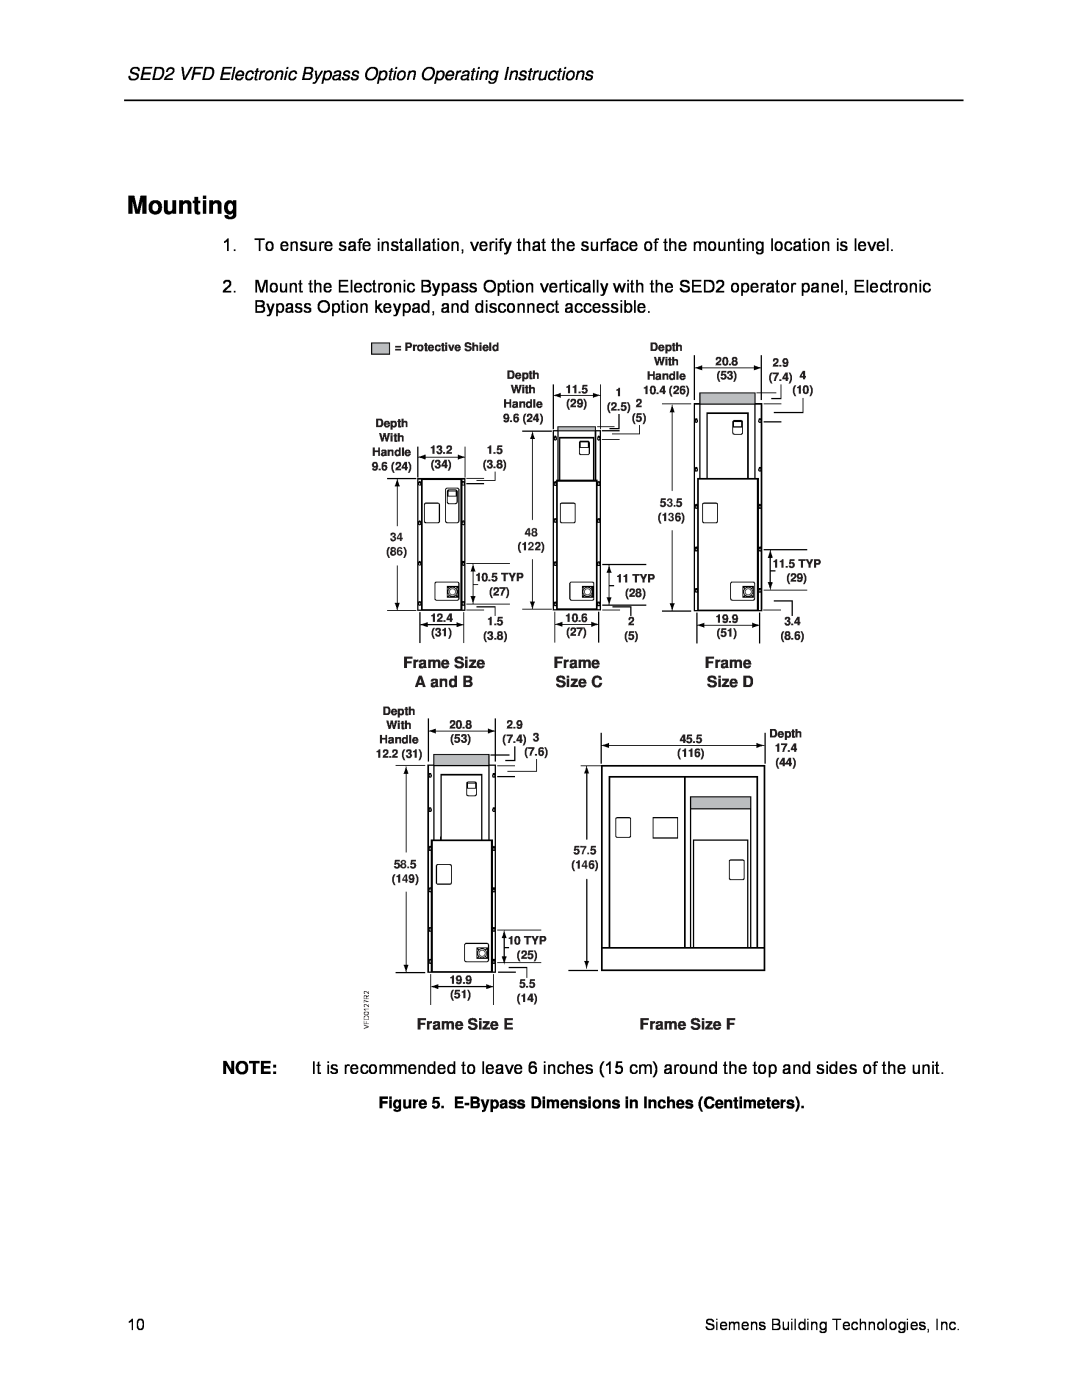 Siemens 125-3208 operating instructions Mounting, Frame Size A and B, Size C, Size D, Frame Size E, Frame Size F 